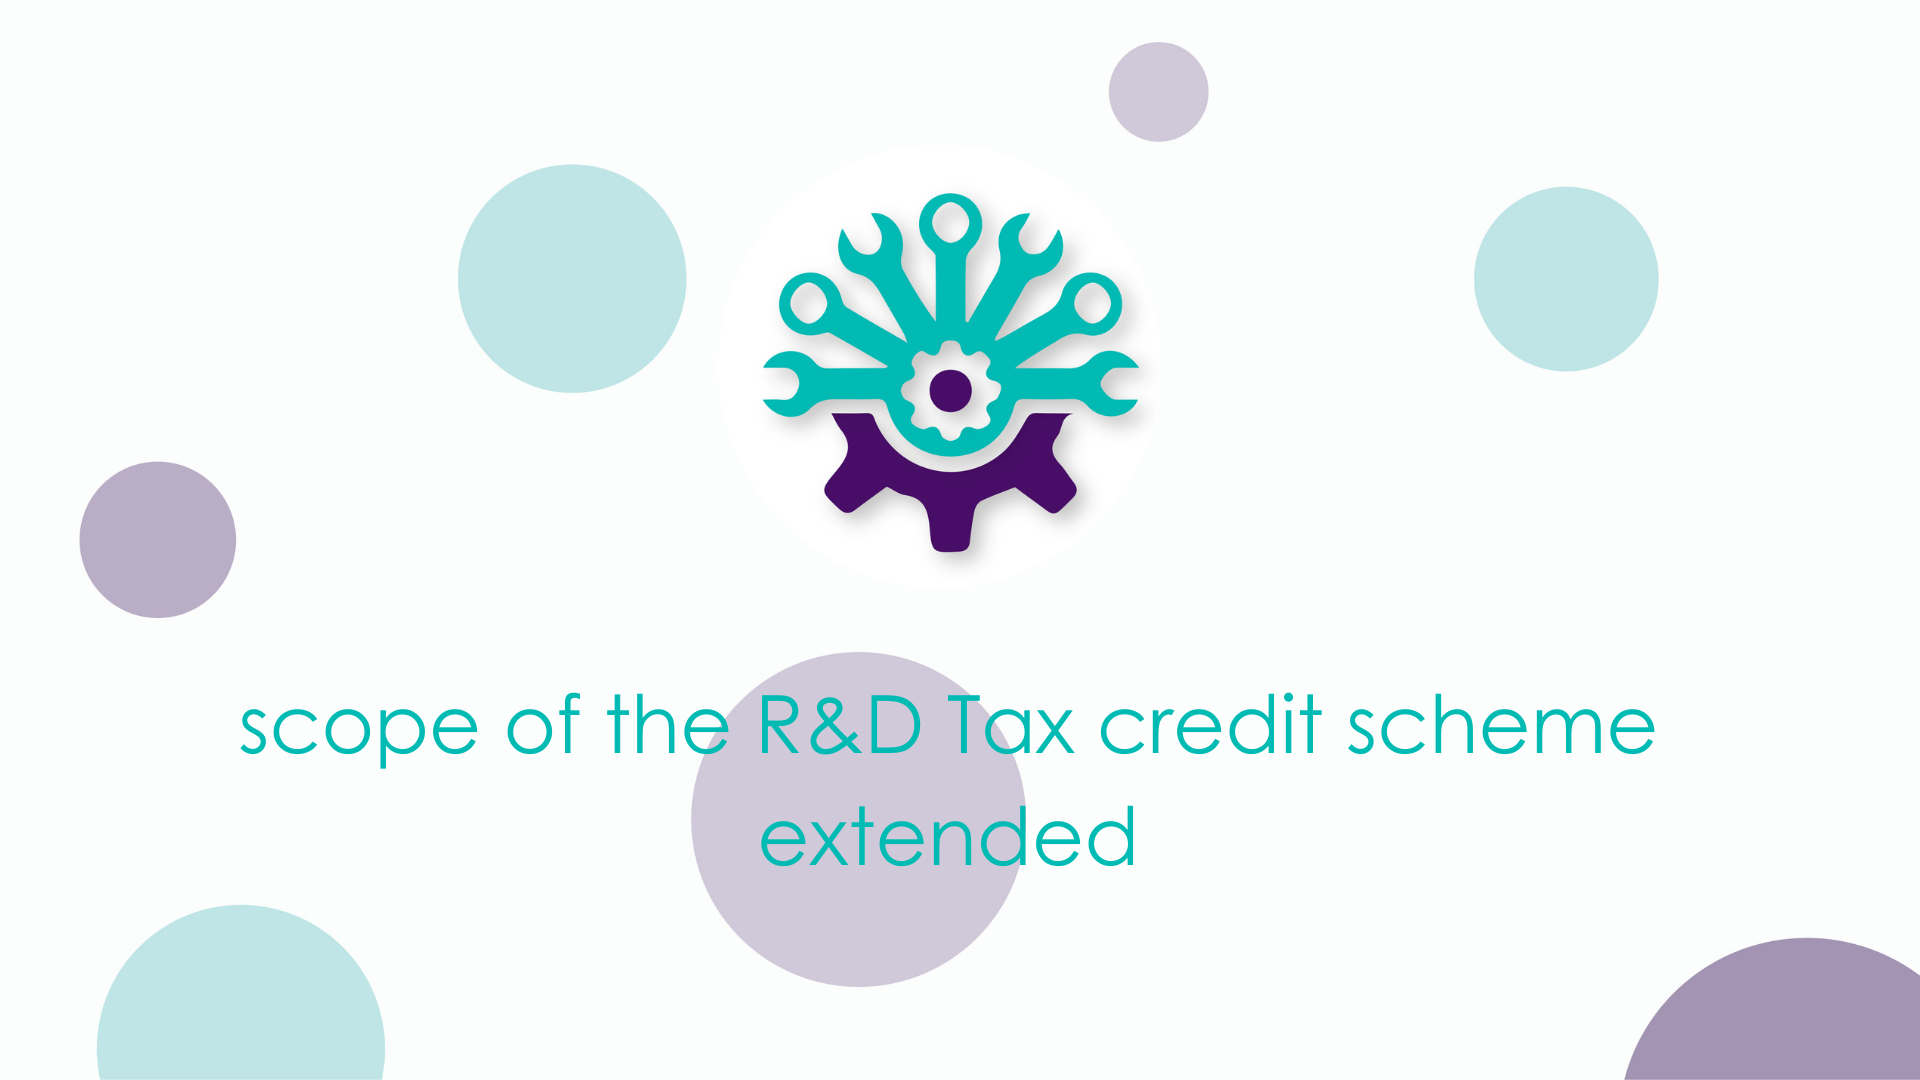 Scope of R&D Tax Credit Scheme extended